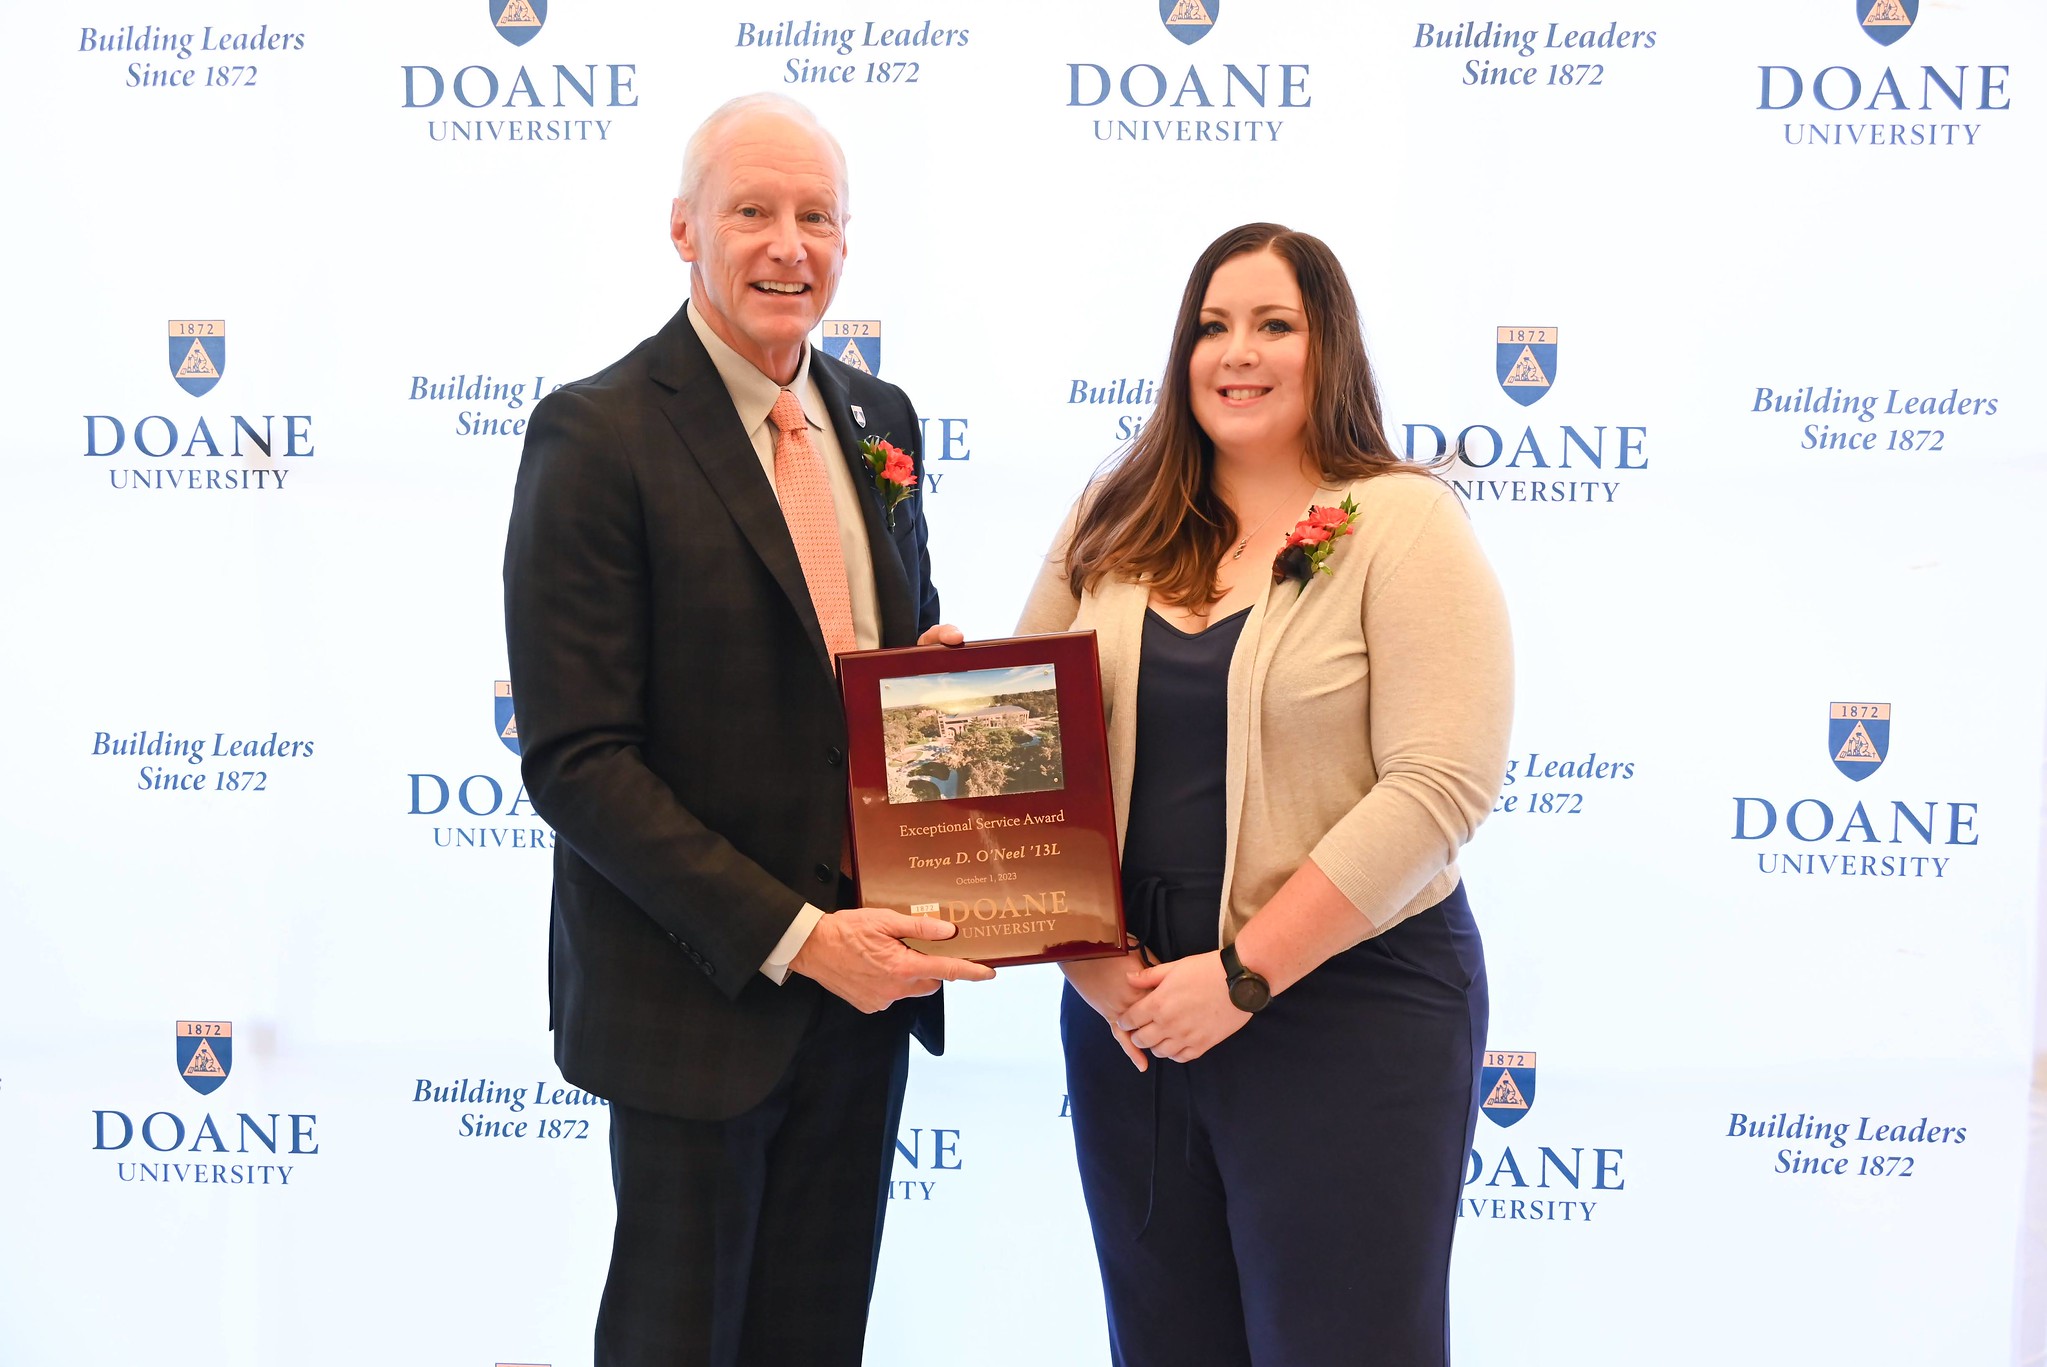 Image of Tonya O'Neel standing next to Dr. Roger Hughes in front of a white background with a pattern of Doane University's shield logo and text that reads "Building Leaders Since 1872."